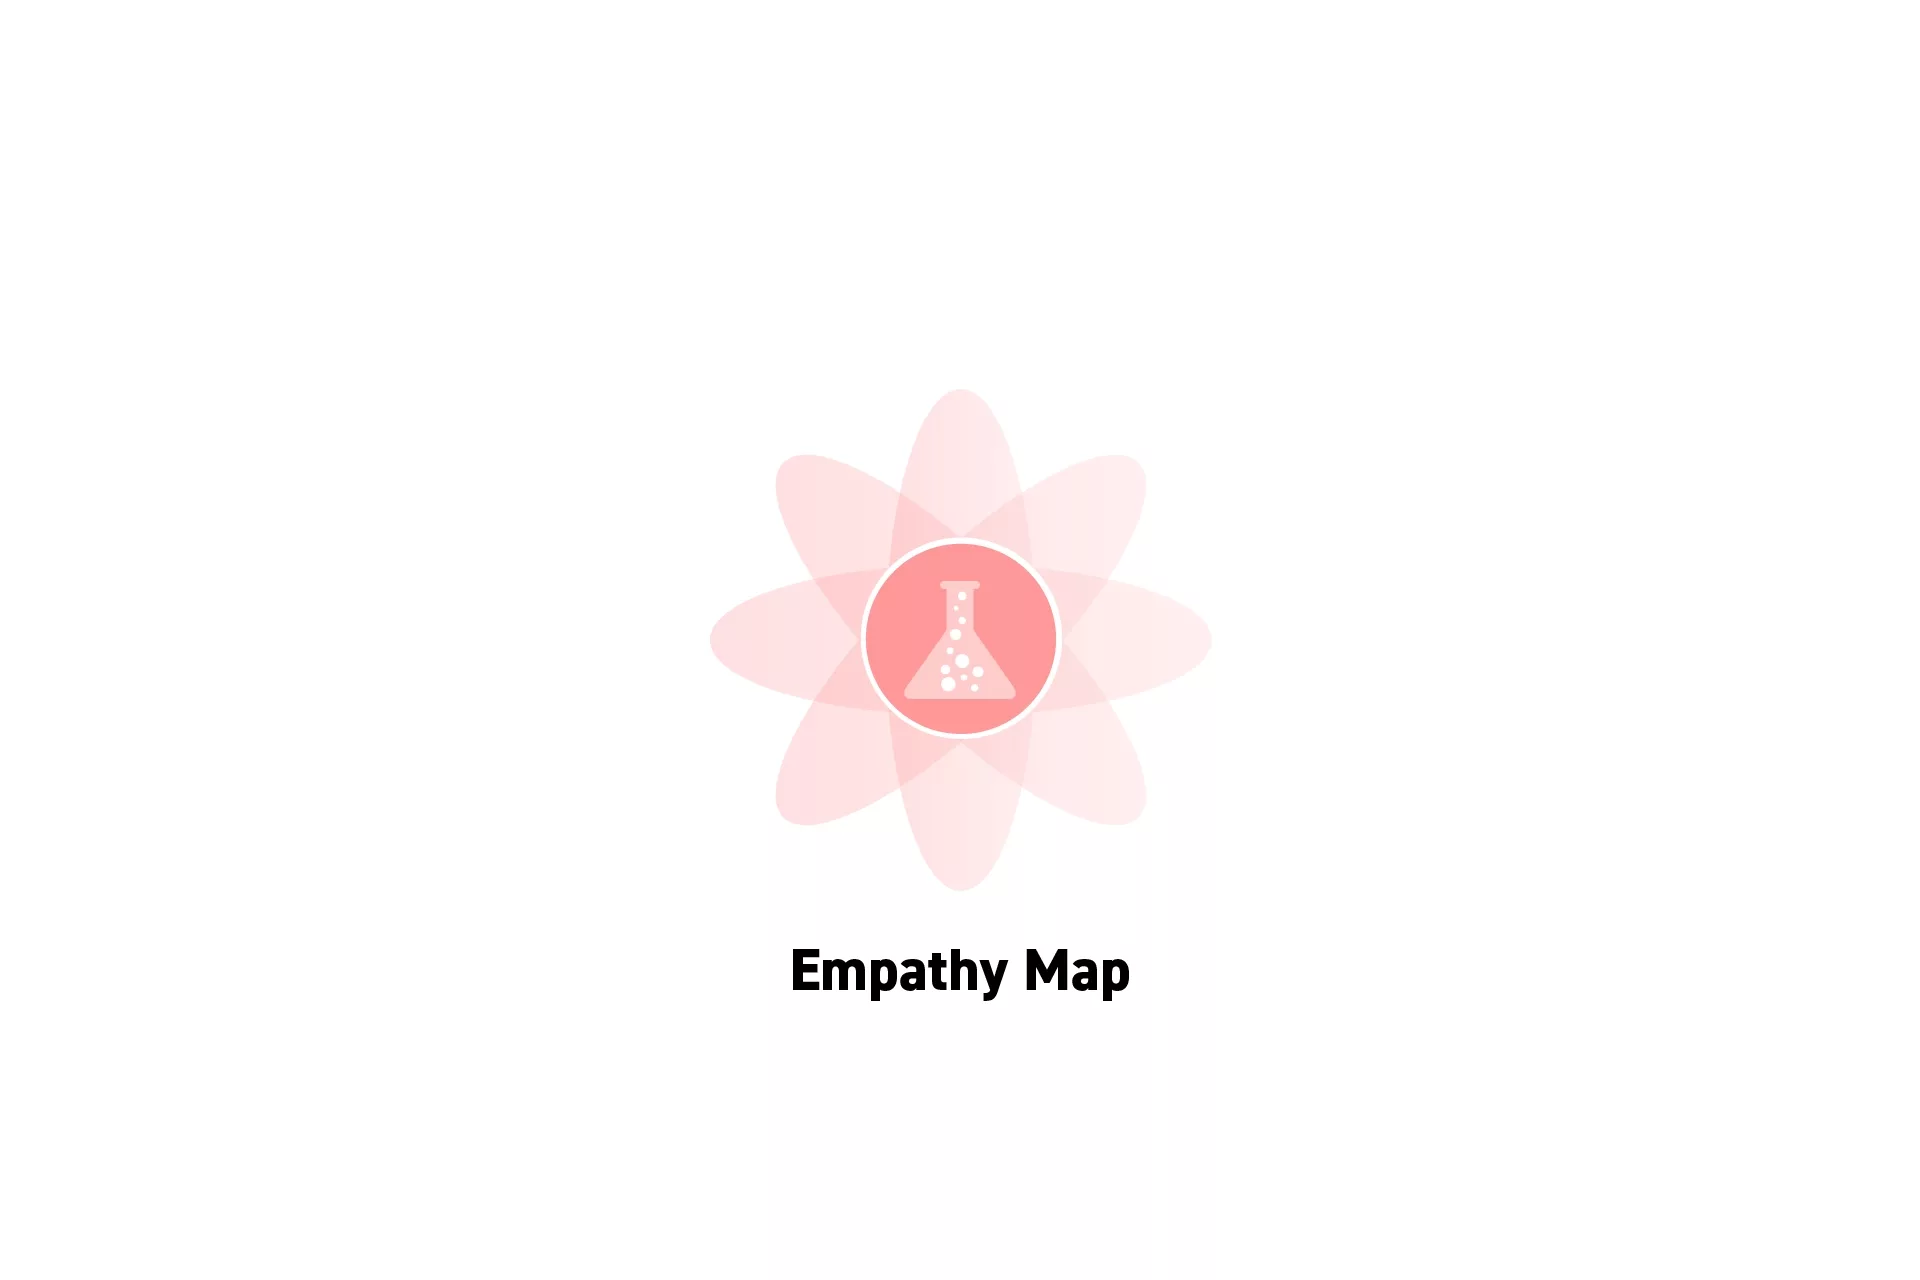 A flower that represents Strategy with the text “Empathy Map” beneath it.